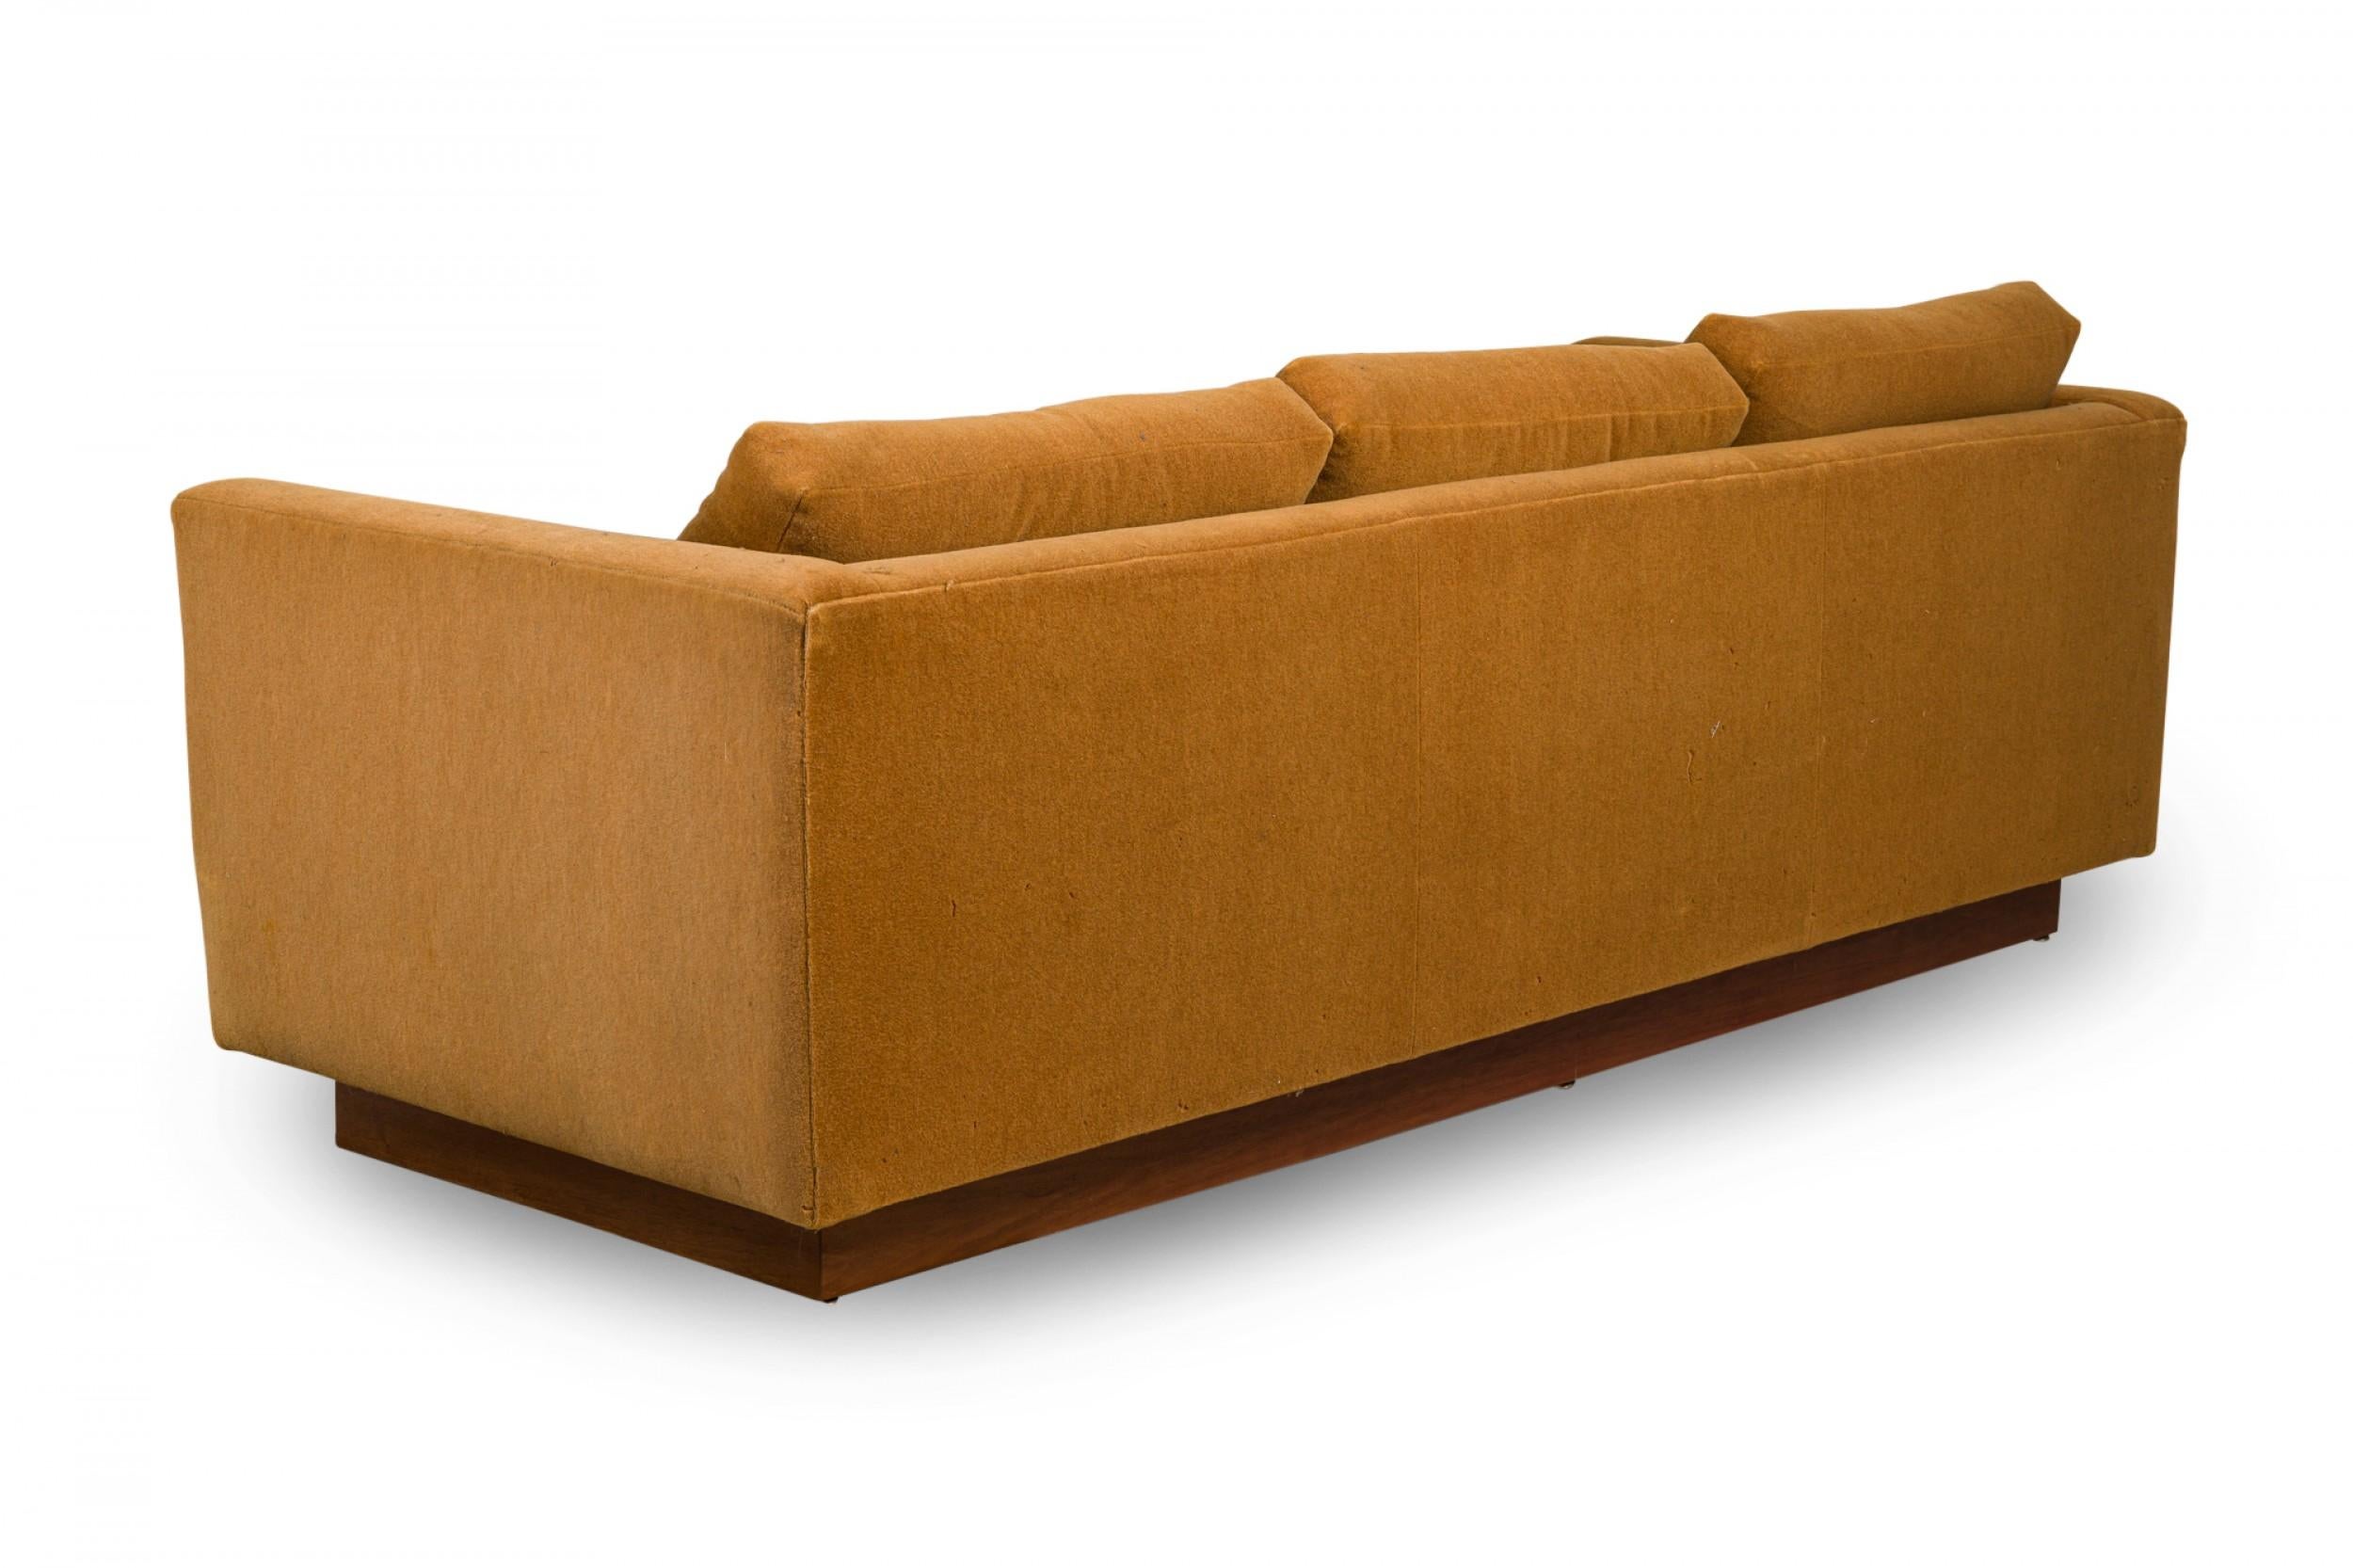 American Milo Baughman Gold Fabric Upholstered Floating 'Tuxedo' Sofa For Sale